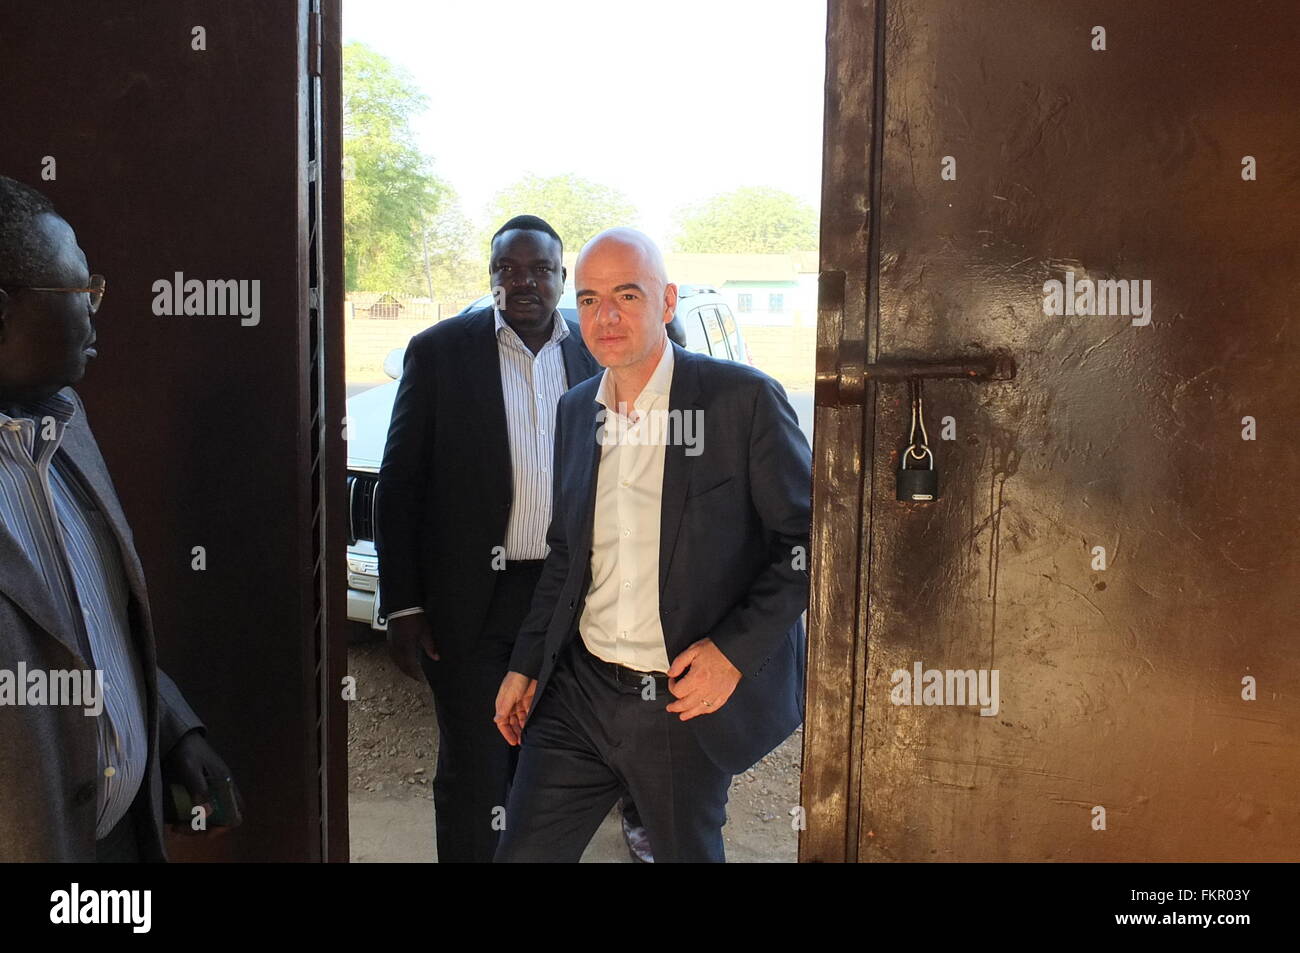 Juba, South Sudan. 5th Mar, 2016. FIFA president GIANNI INFANTINO visits Juba stating he will develop the football in South Sudan, as position of (FIFA) president. The Swiss Italian Gianni who was accompanied by the former Cameroonian National football player Geremi Njitap said he will put the subject of football development, especially the women in south Sudan for his consideration, he added South Sudan is a sample of FIFA. © Samir Bol/ZUMA Wire/ZUMAPRESS.com/Alamy Live News Stock Photo